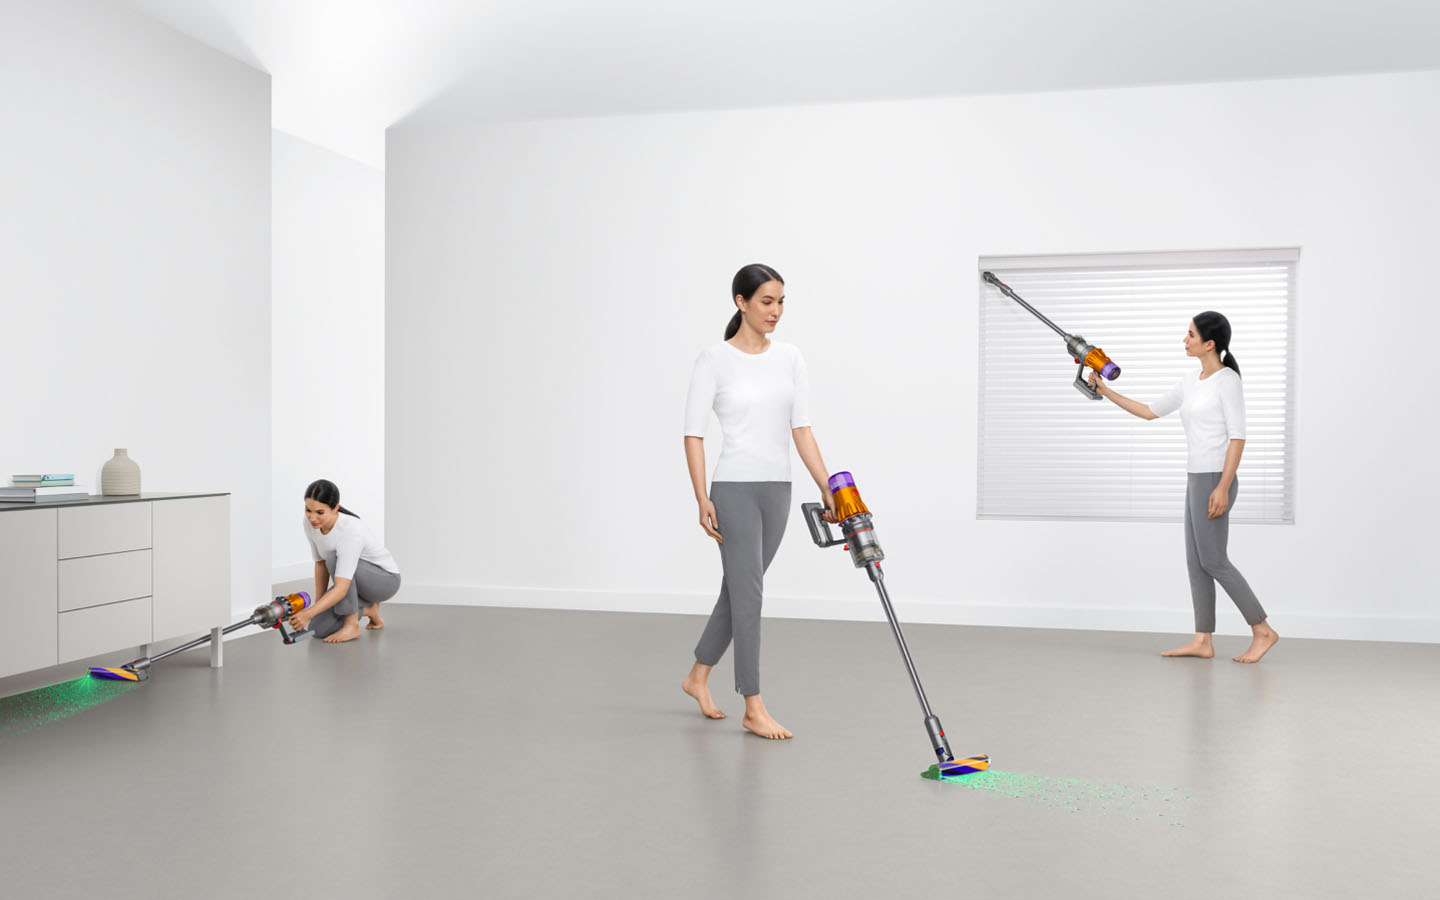 Clean up with Dyson's vacuum hero, the V12 Detect Slim Absolute